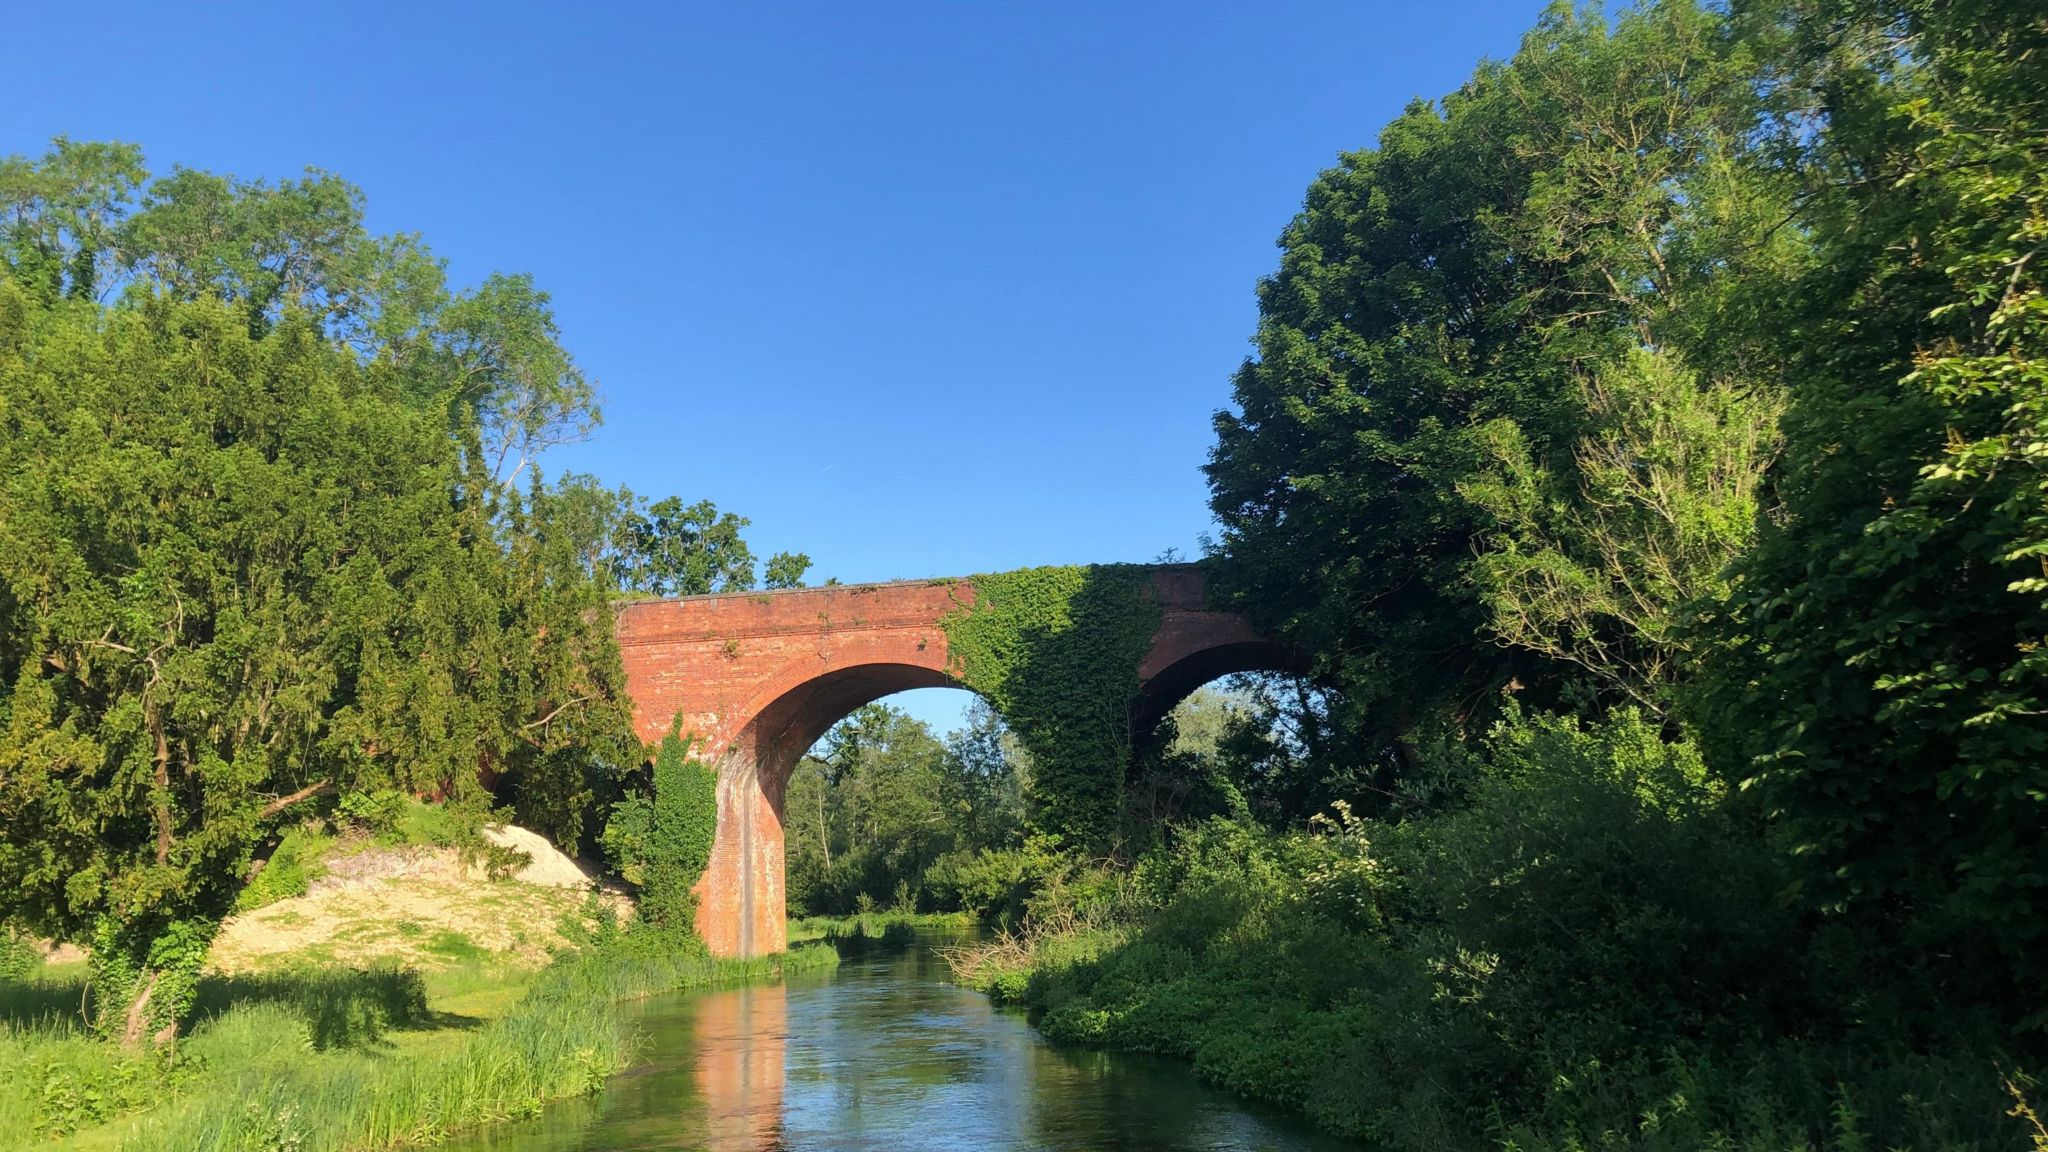 TUESDAY - A brick arch bridge over the river at Whitchurch under a blue sky